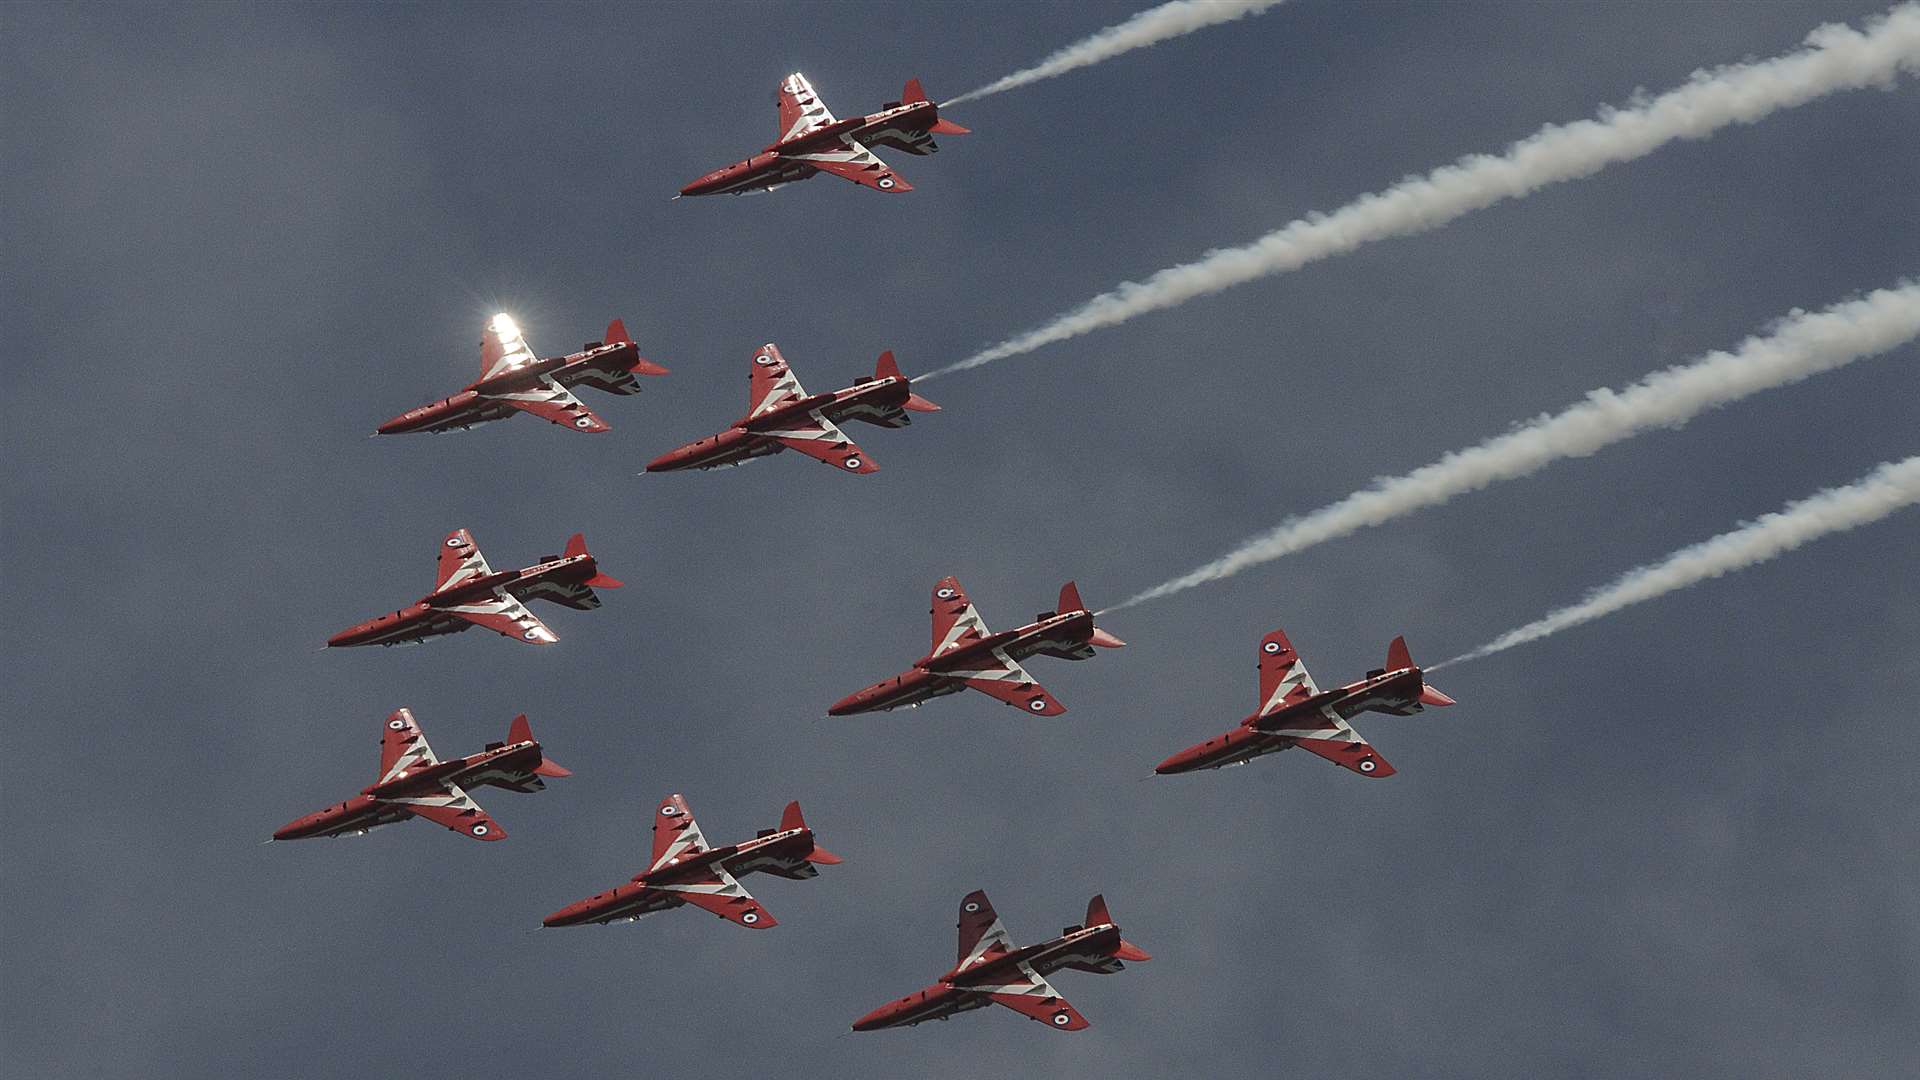 The Red Arrows will display